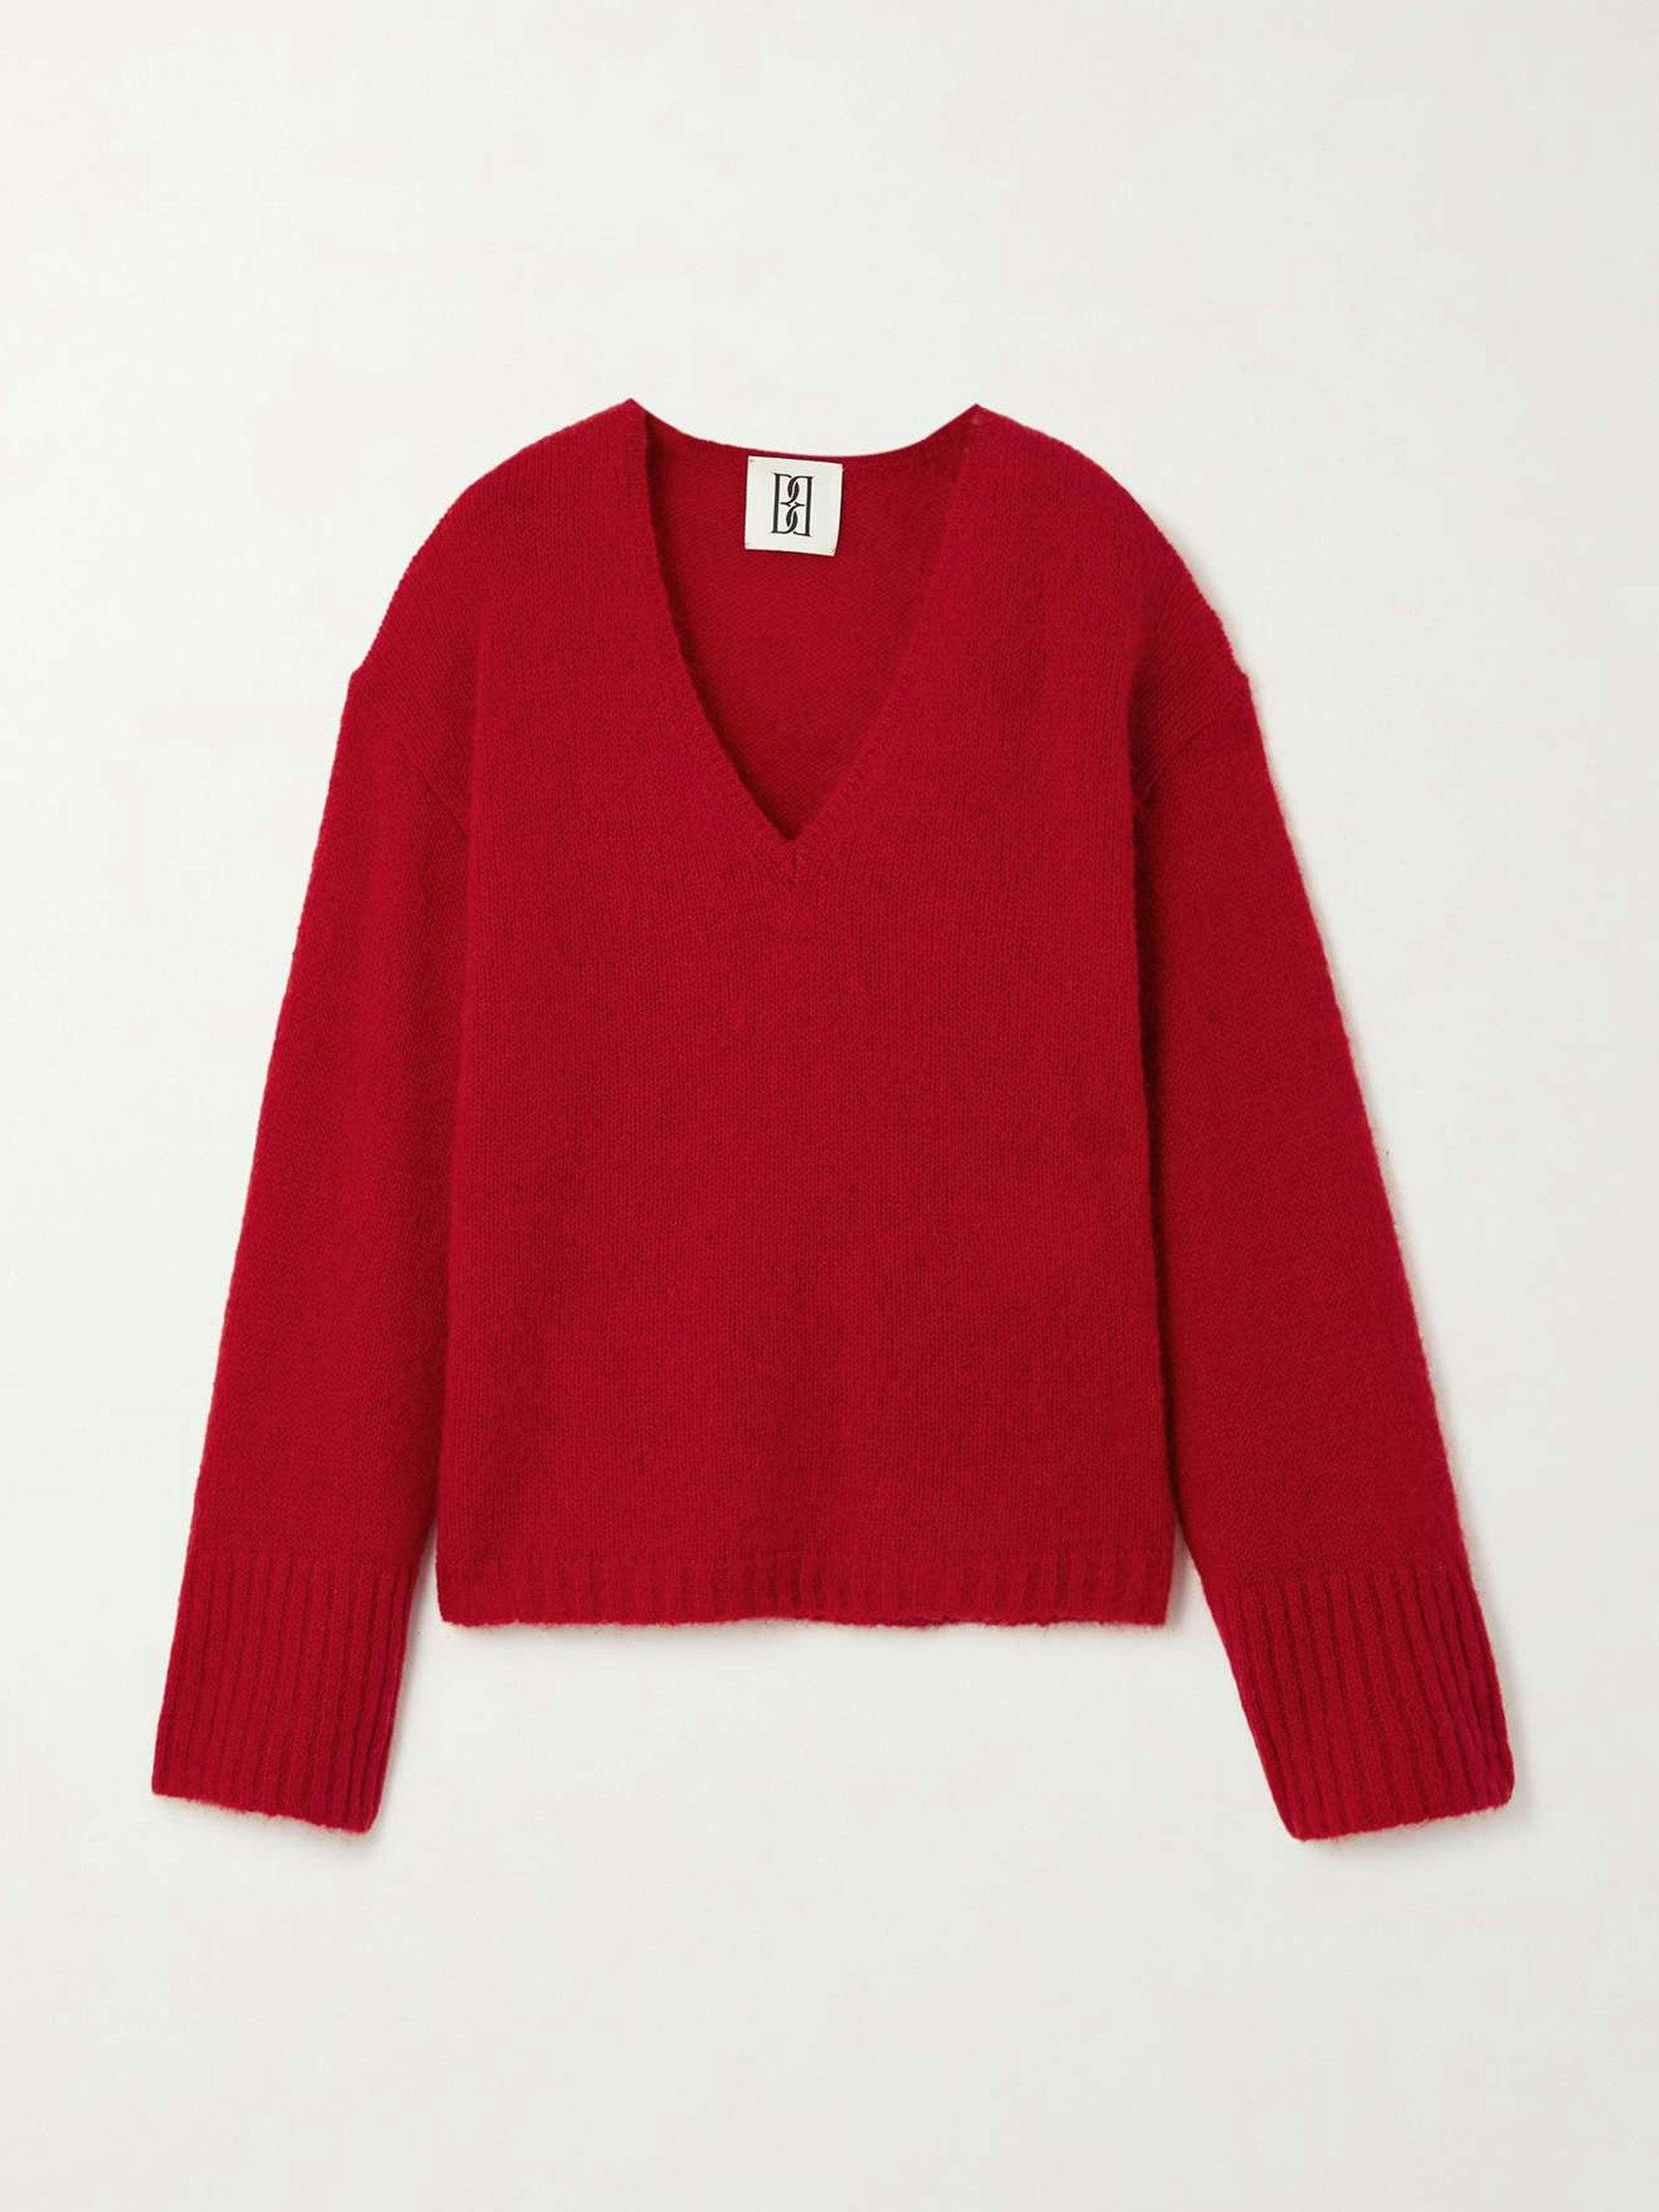 Cimone knitted sweater